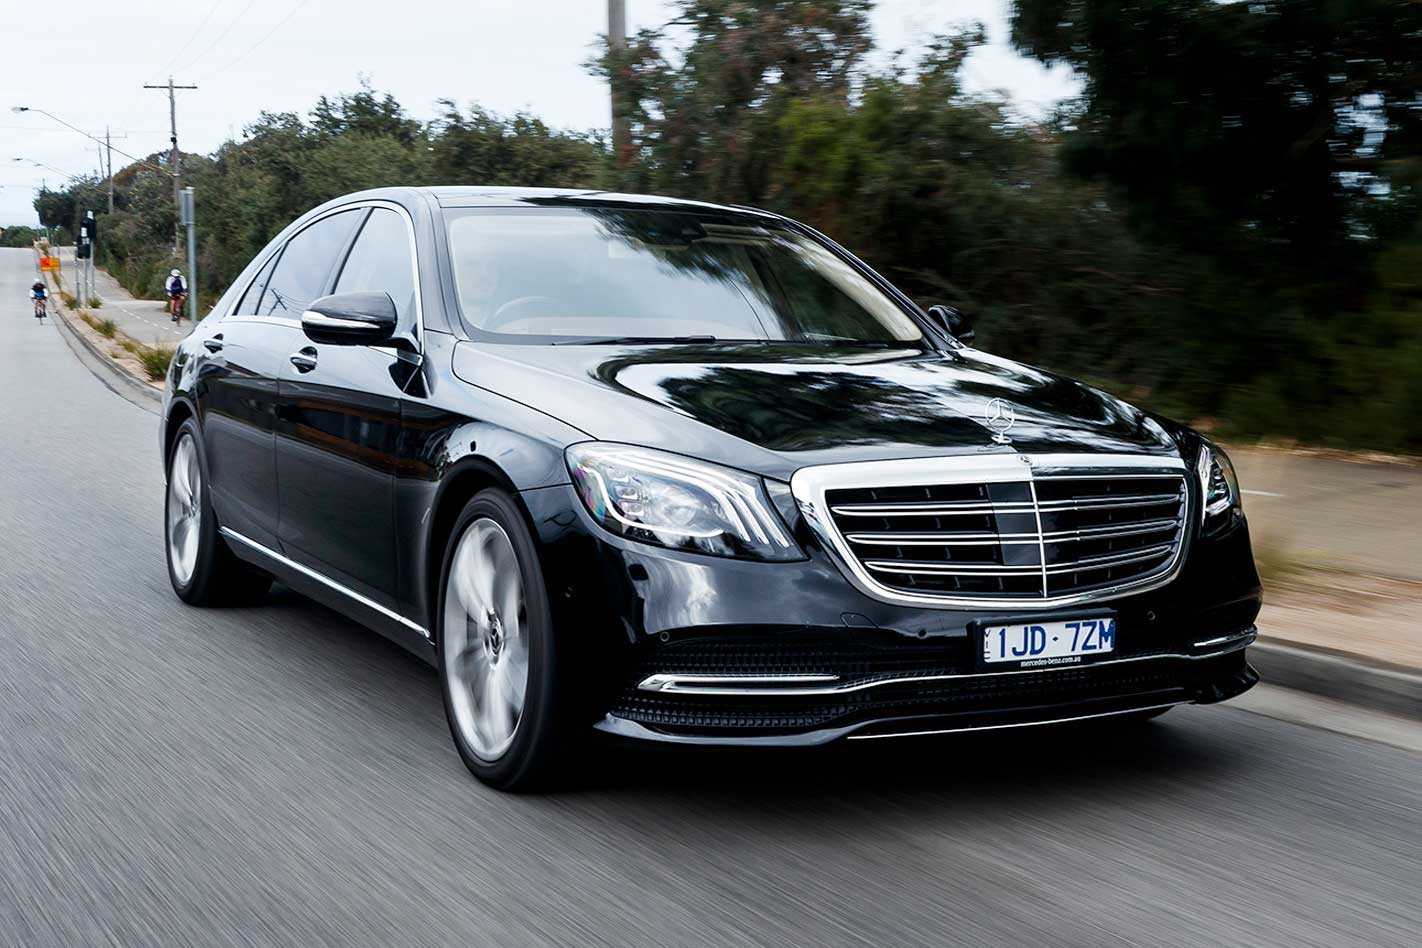 New 2020/2021 Mercedes-Benz S560 Prices & Reviews in 